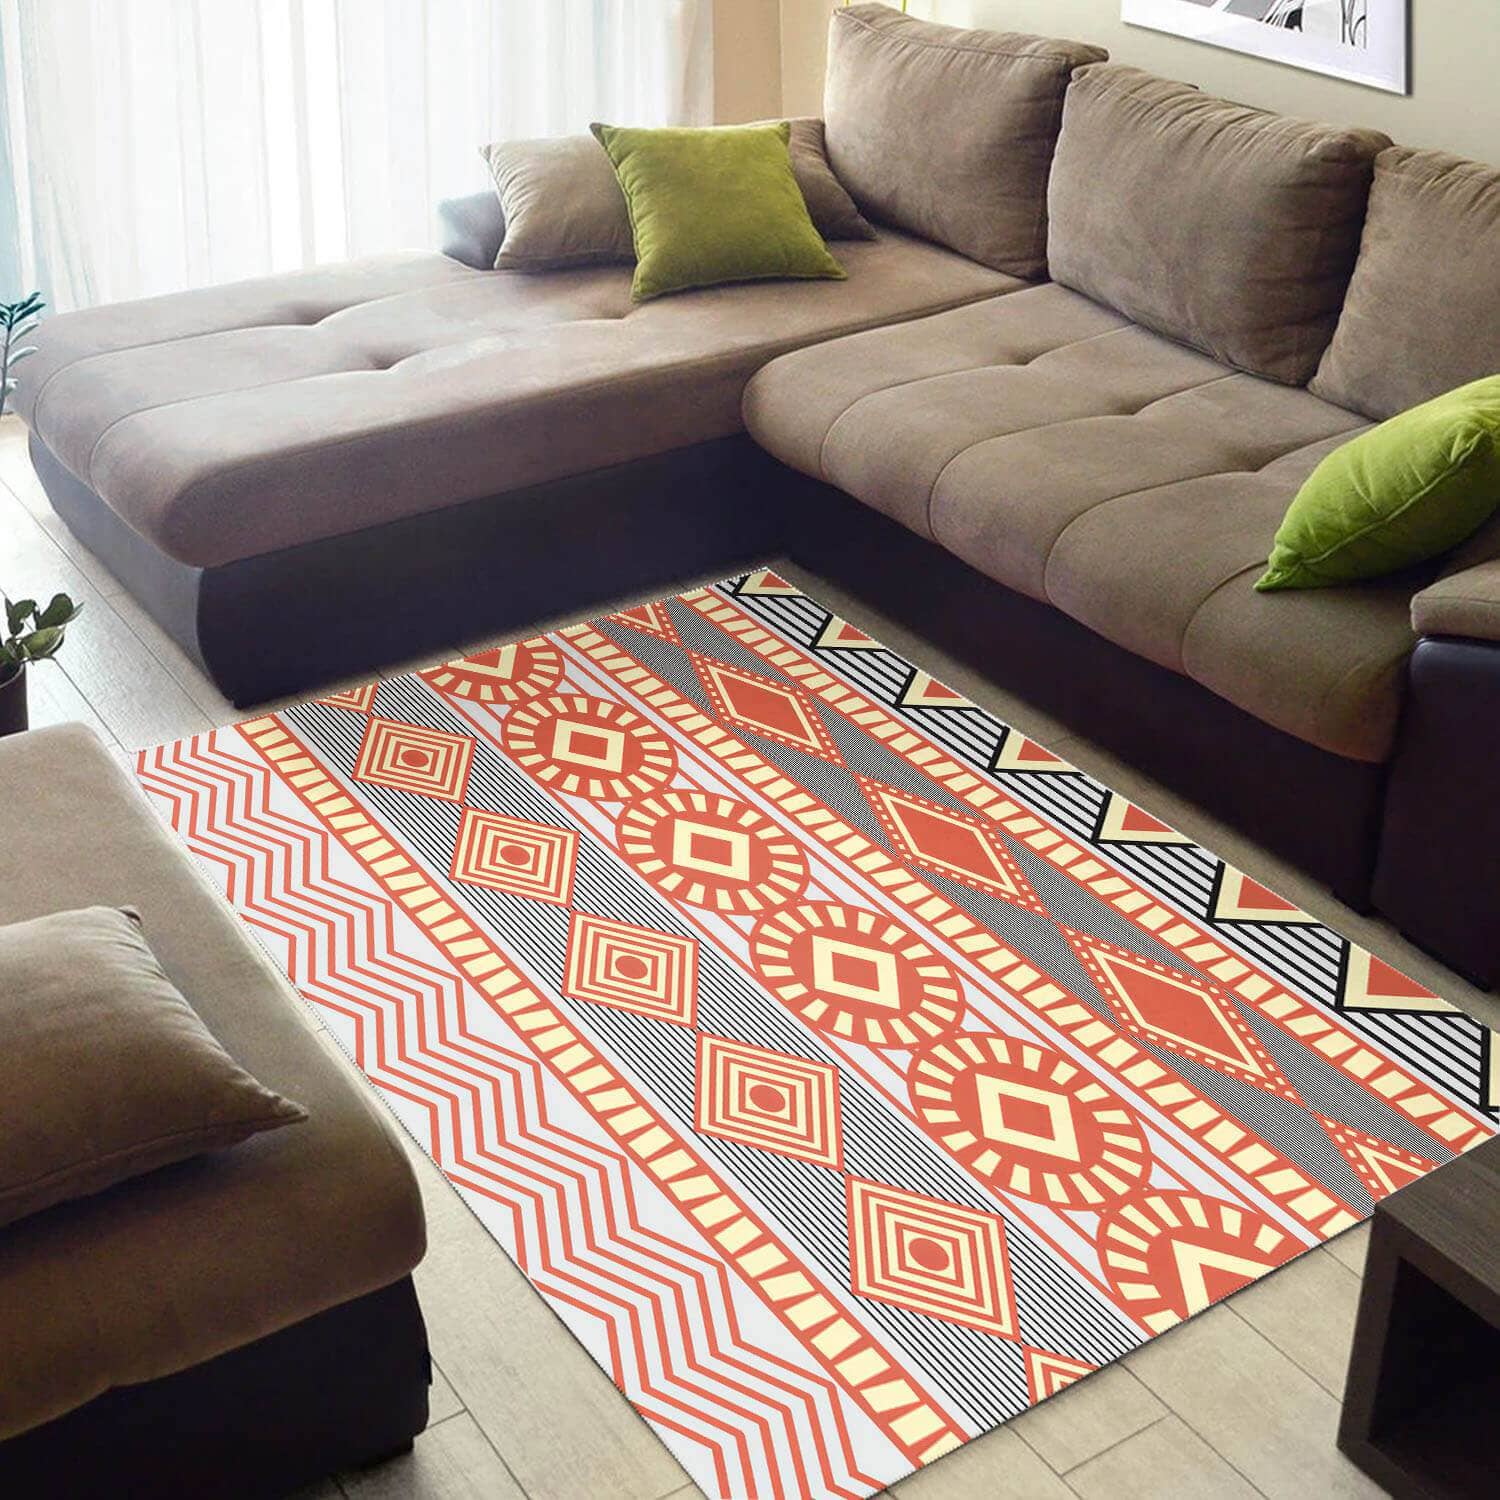 Trendy African Unique Print Seamless Pattern Large Carpet Style Rug